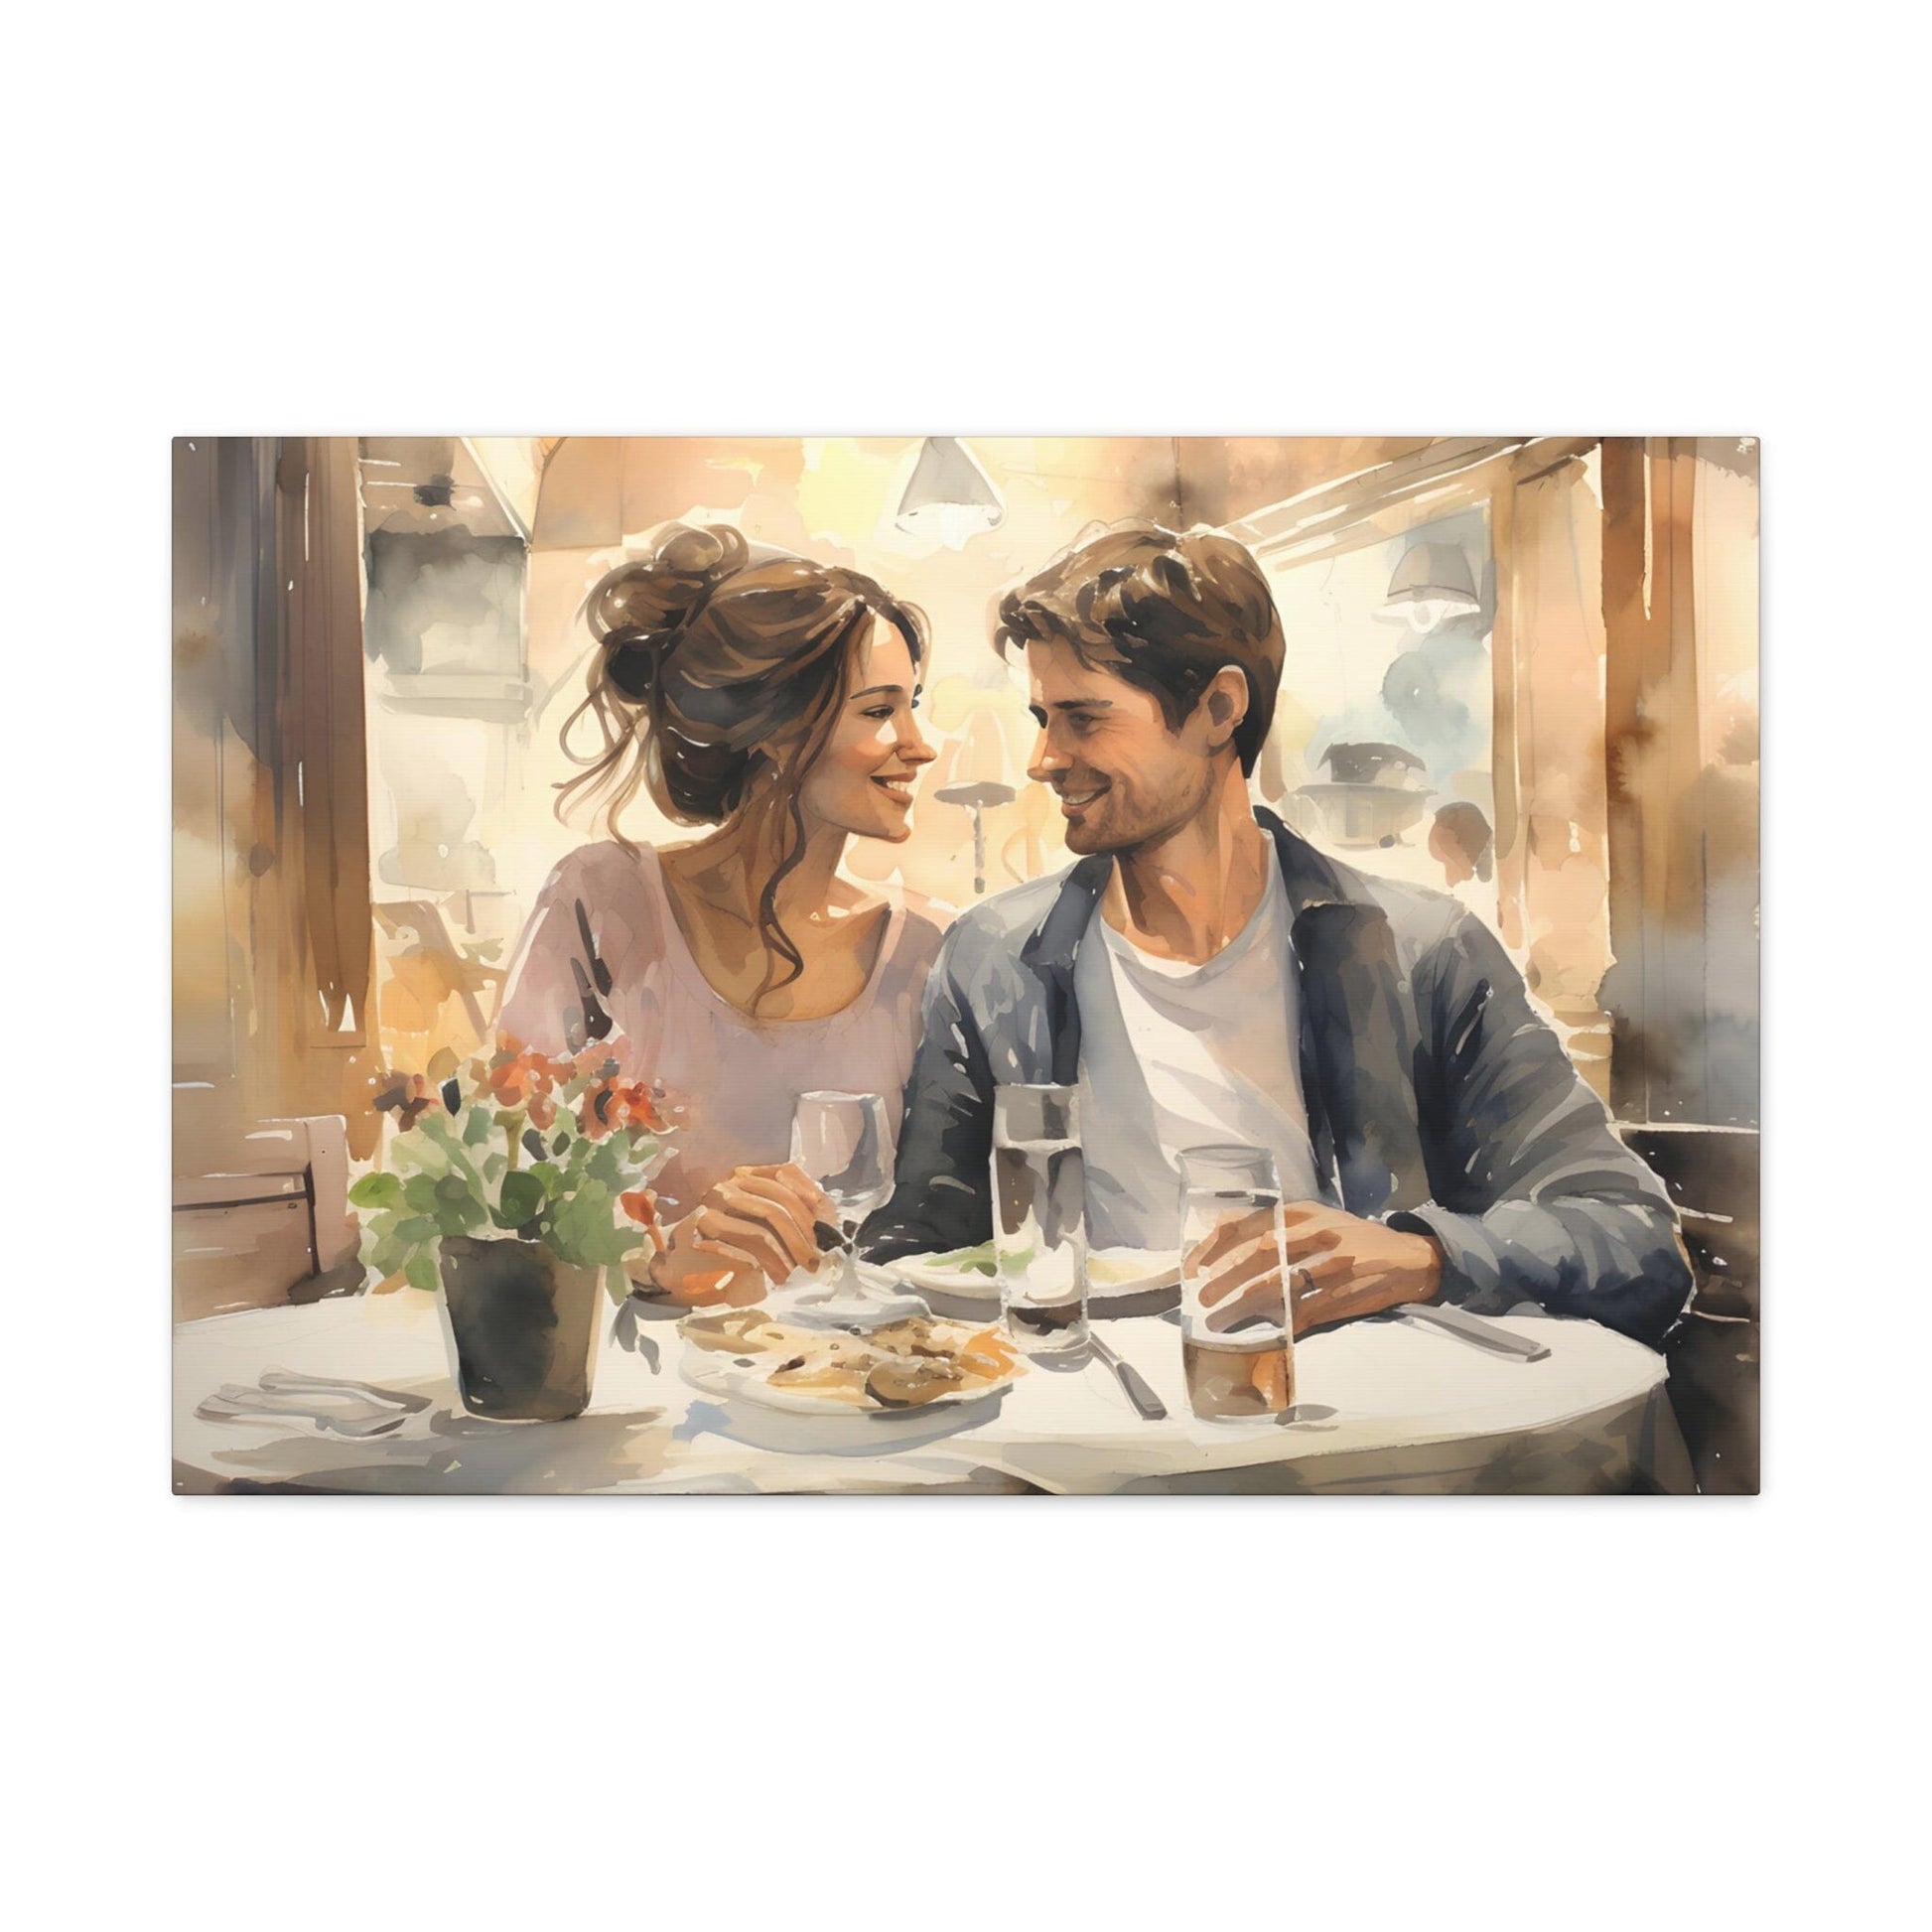 pic 3 This captivating watercolor canvas showcases a young couple, deeply in love, sharing an intimate meal at a cozy restaurant. The soft, romantic hues highlight their comfort and contentment, creating a tender atmosphere. It's a heartfelt portrayal of romance.